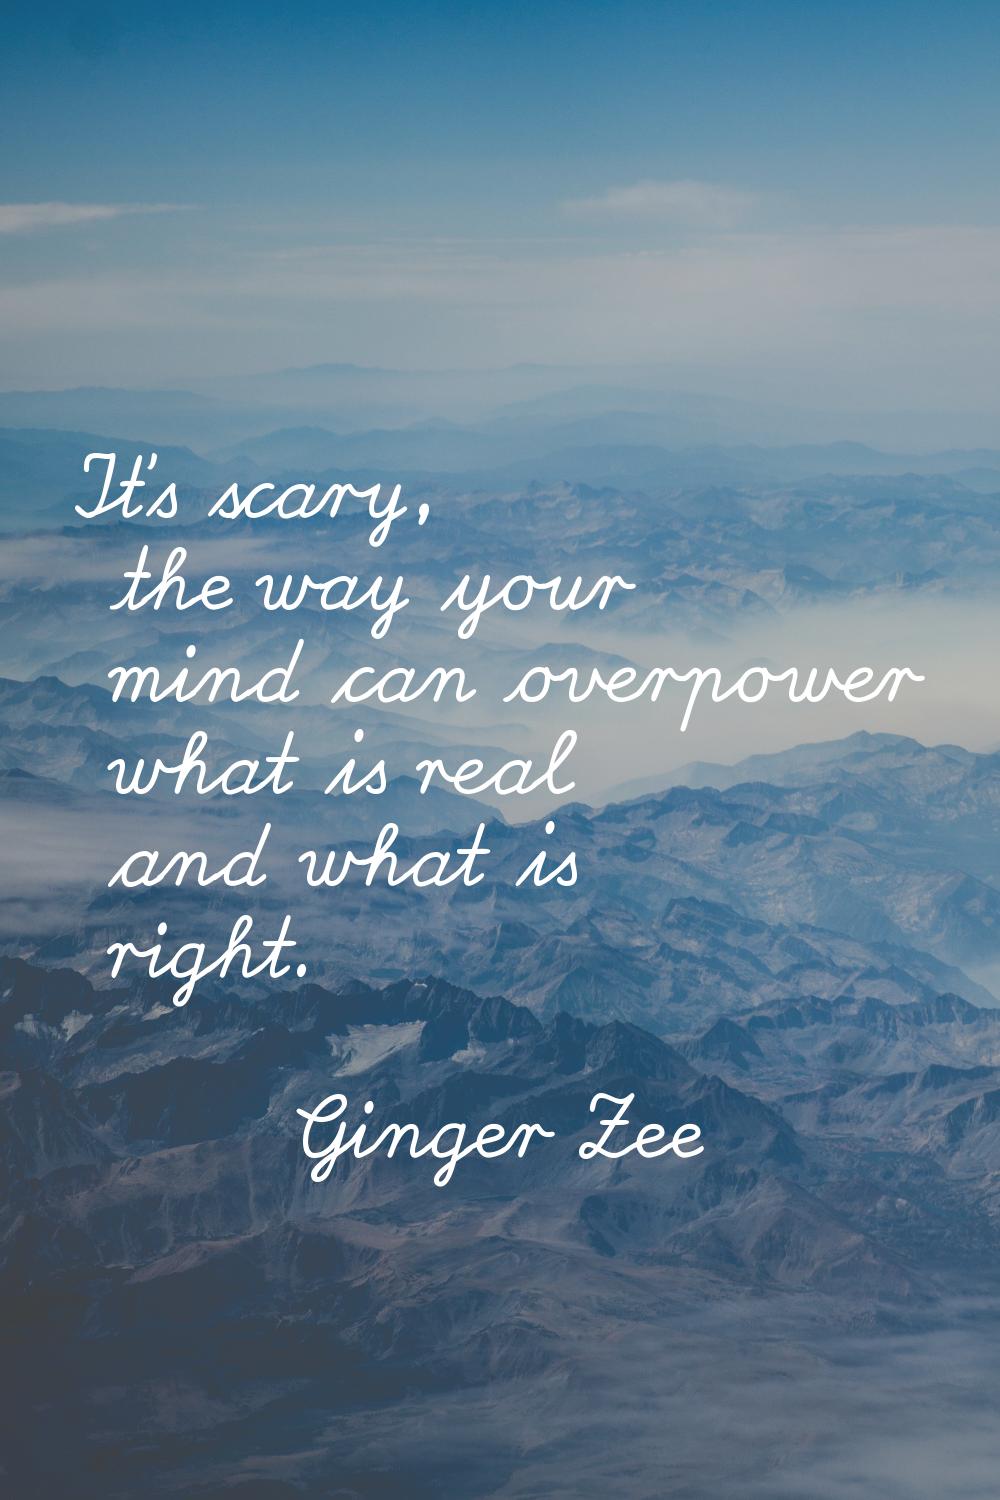 It's scary, the way your mind can overpower what is real and what is right.